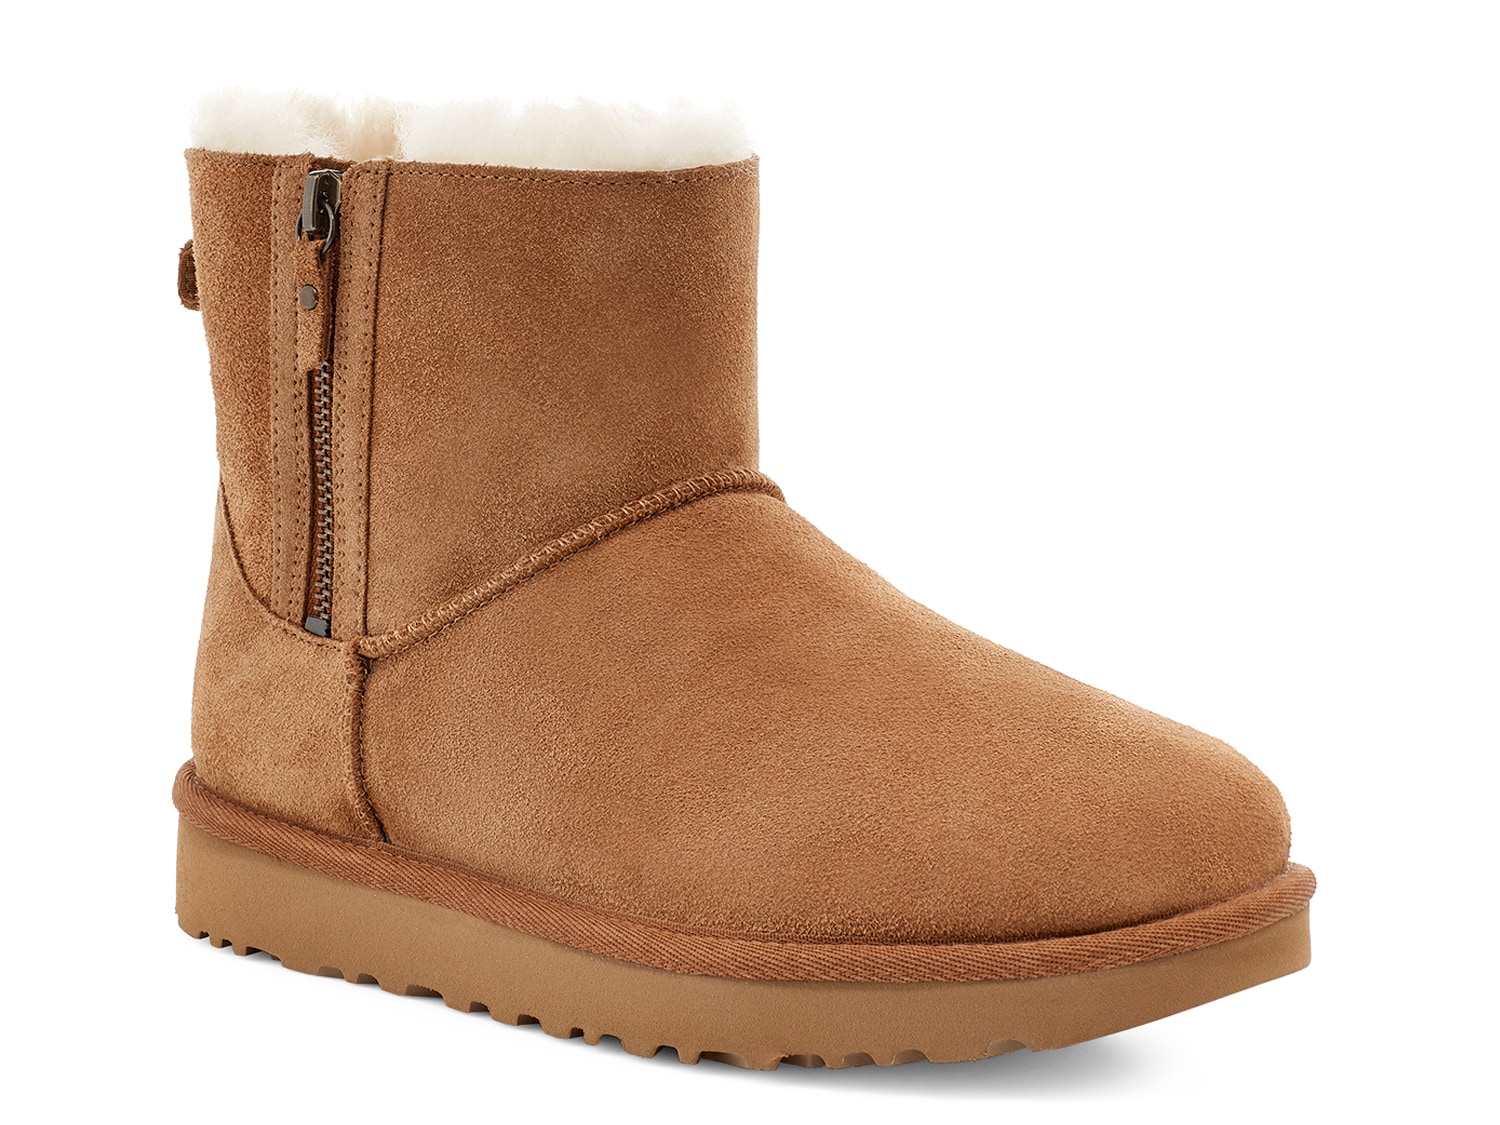 dsw ugg moccasins Cheaper Than Retail 